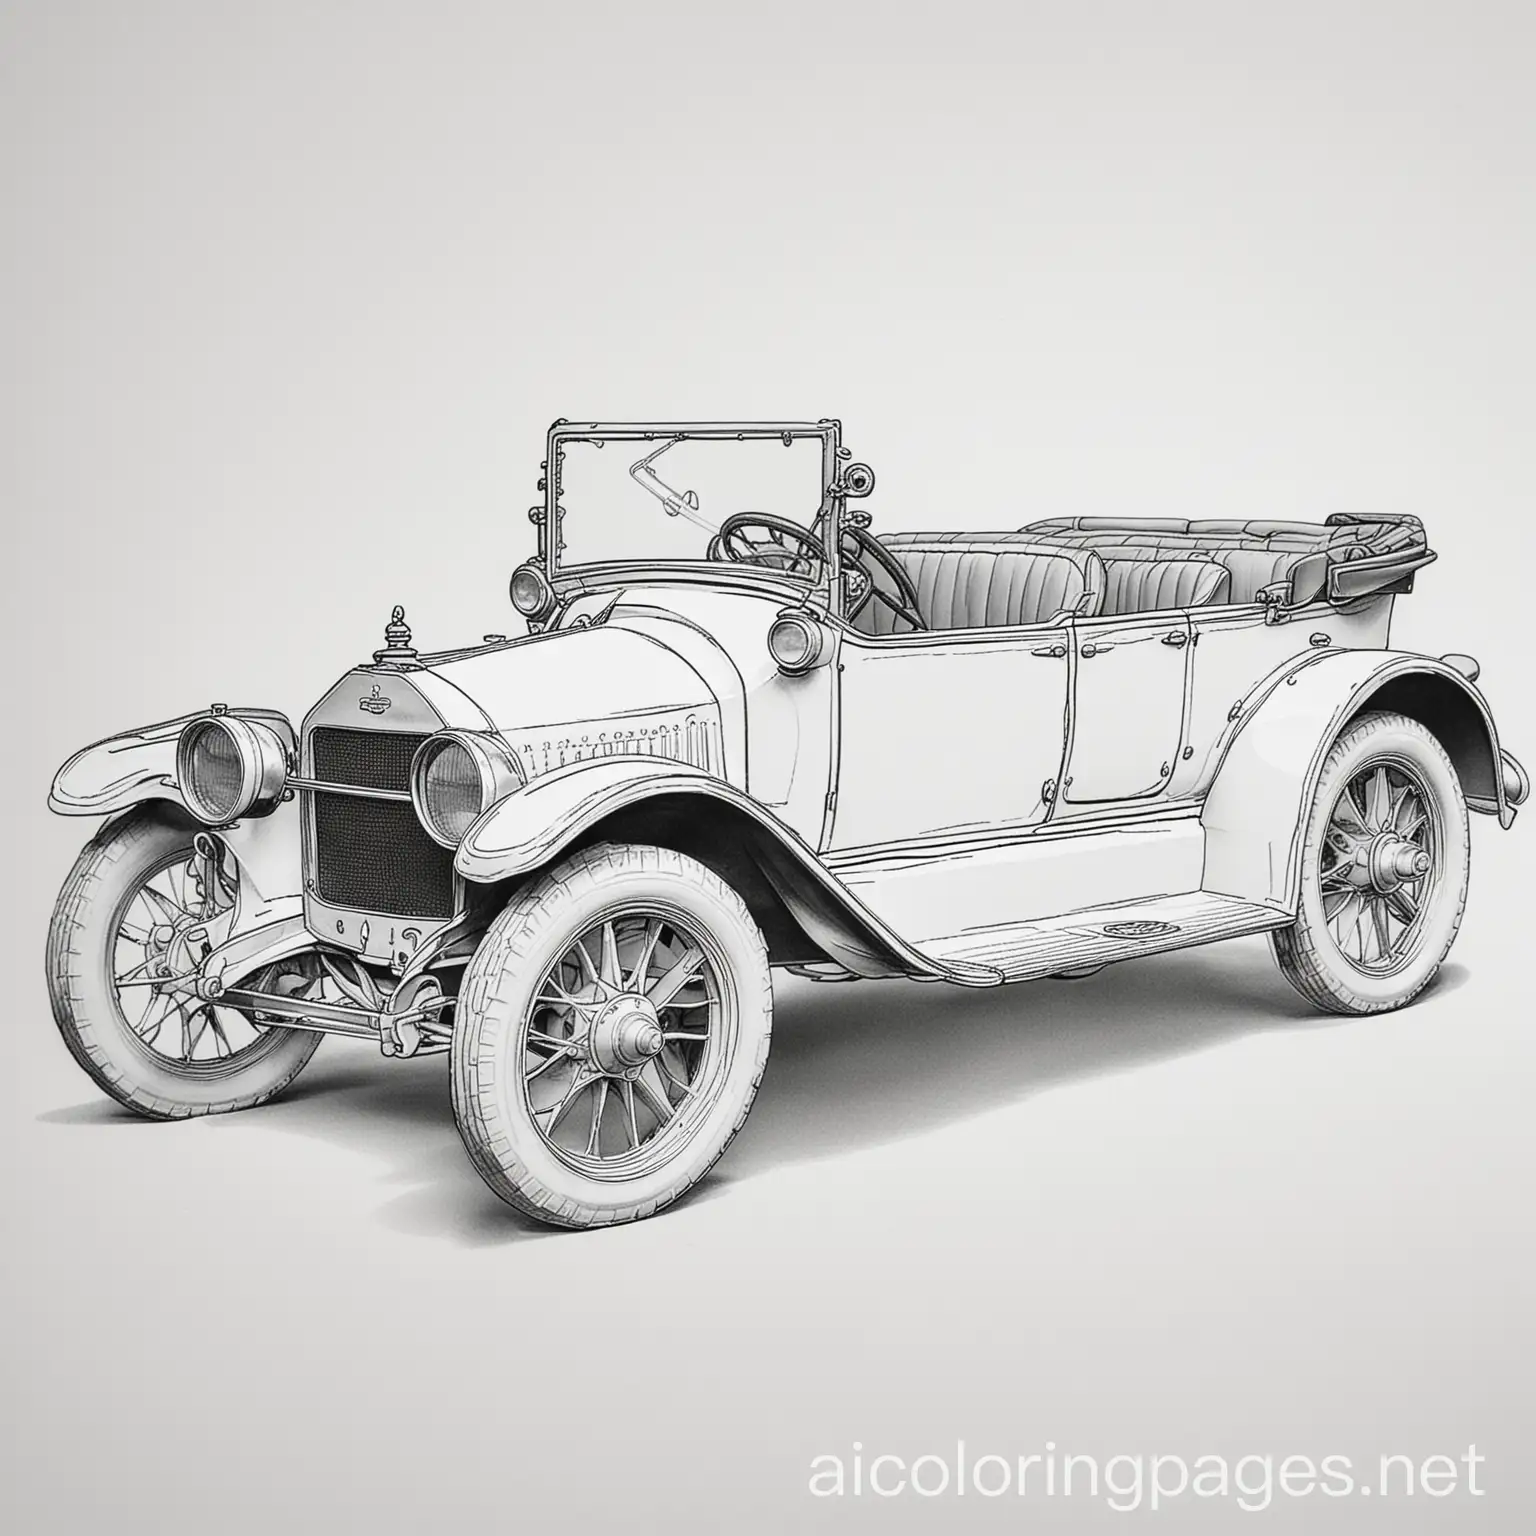 1912 Chevrolet Classic Six coloring page, Coloring Page, black and white, line art, white background, Simplicity, Ample White Space. The background of the coloring page is plain white to make it easy for young children to color within the lines. The outlines of all the subjects are easy to distinguish, making it simple for kids to color without too much difficulty